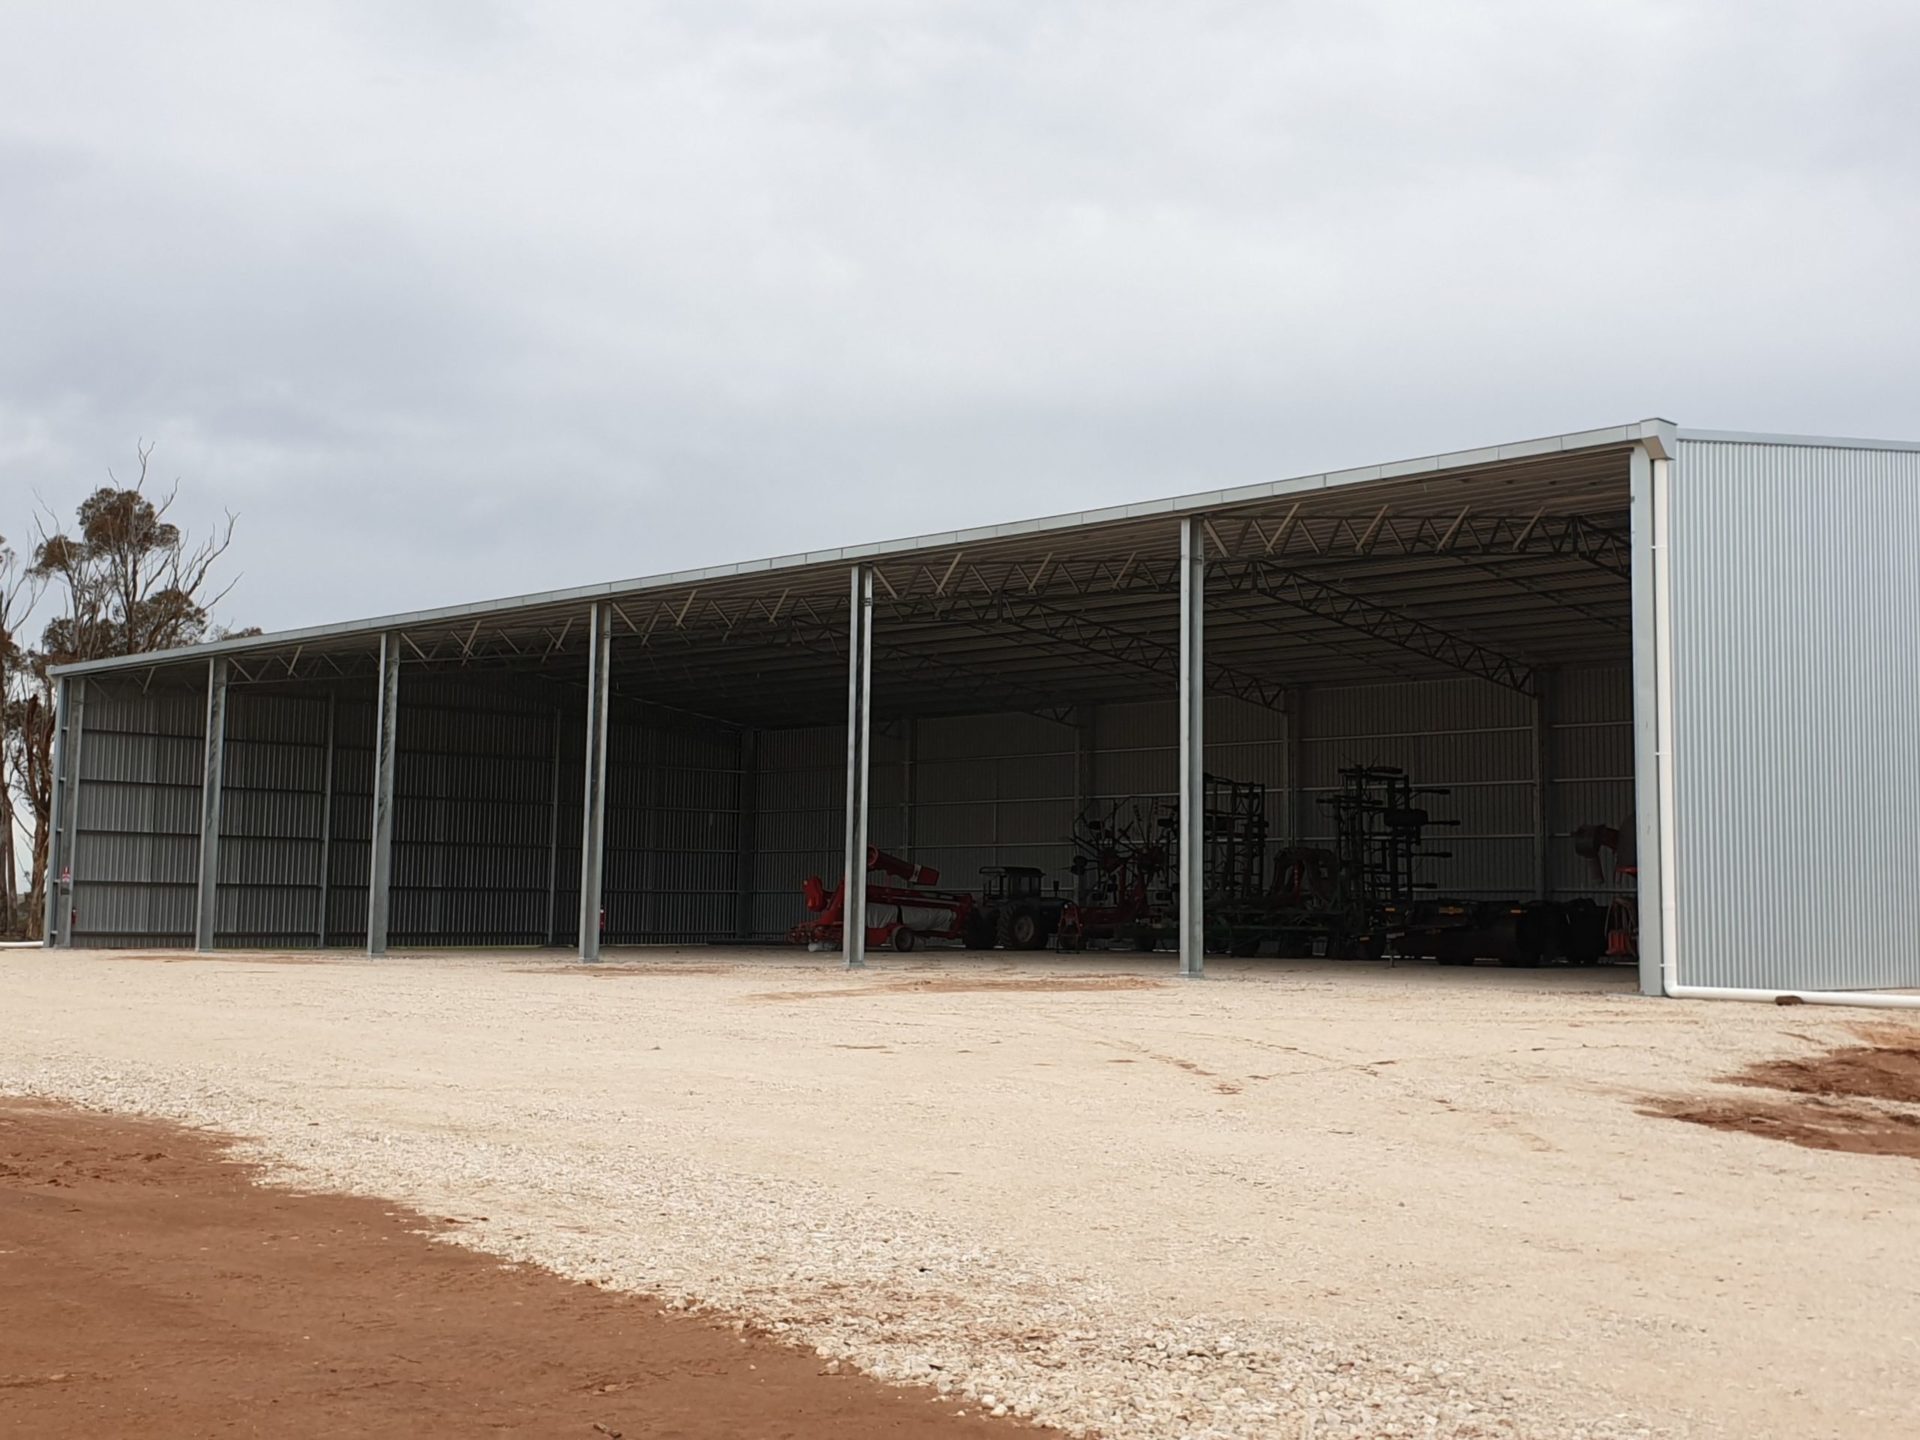 You are currently viewing A 48m x 24m x 7.5m open-front hay shed